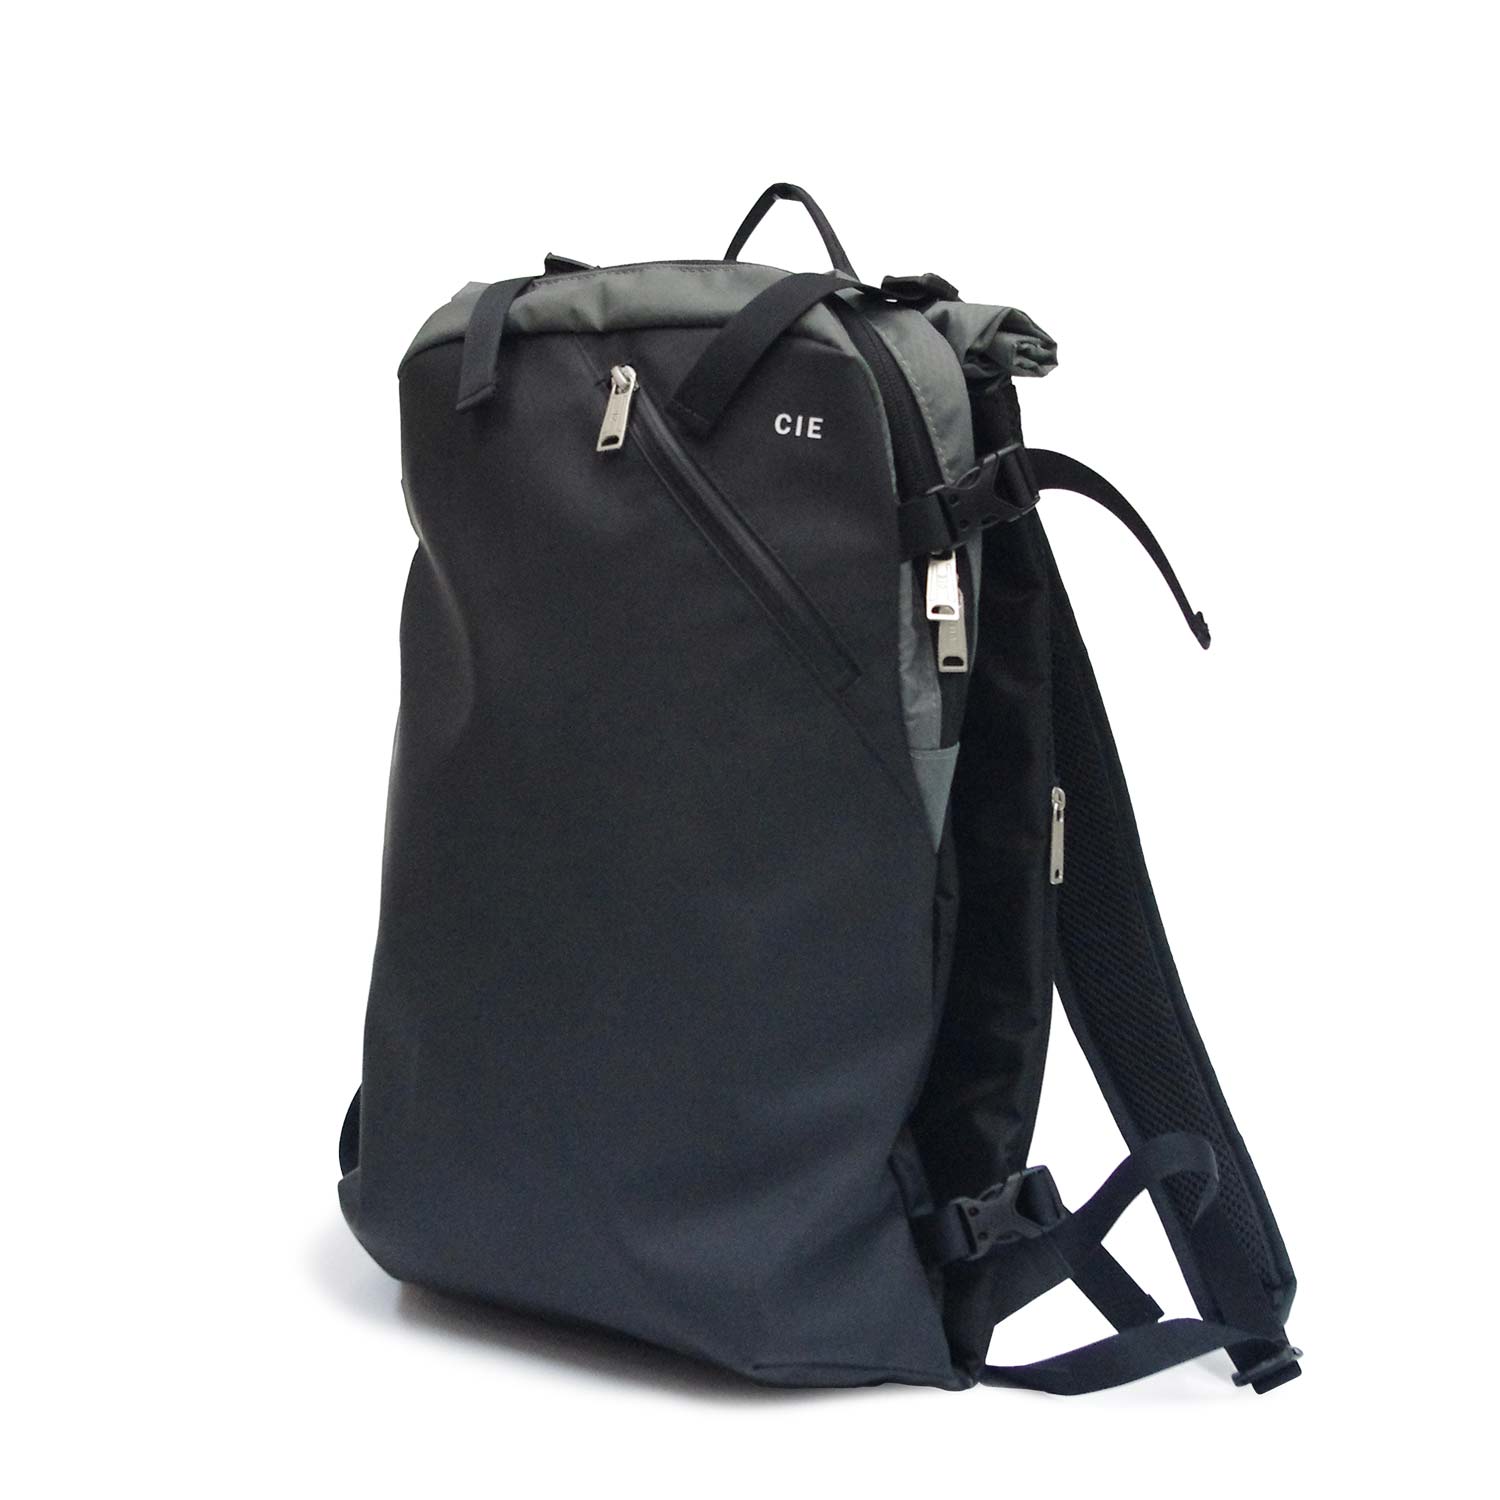 CIE-VARIOUS BACKPACK-01 / LIALWORKS -リアルワークス